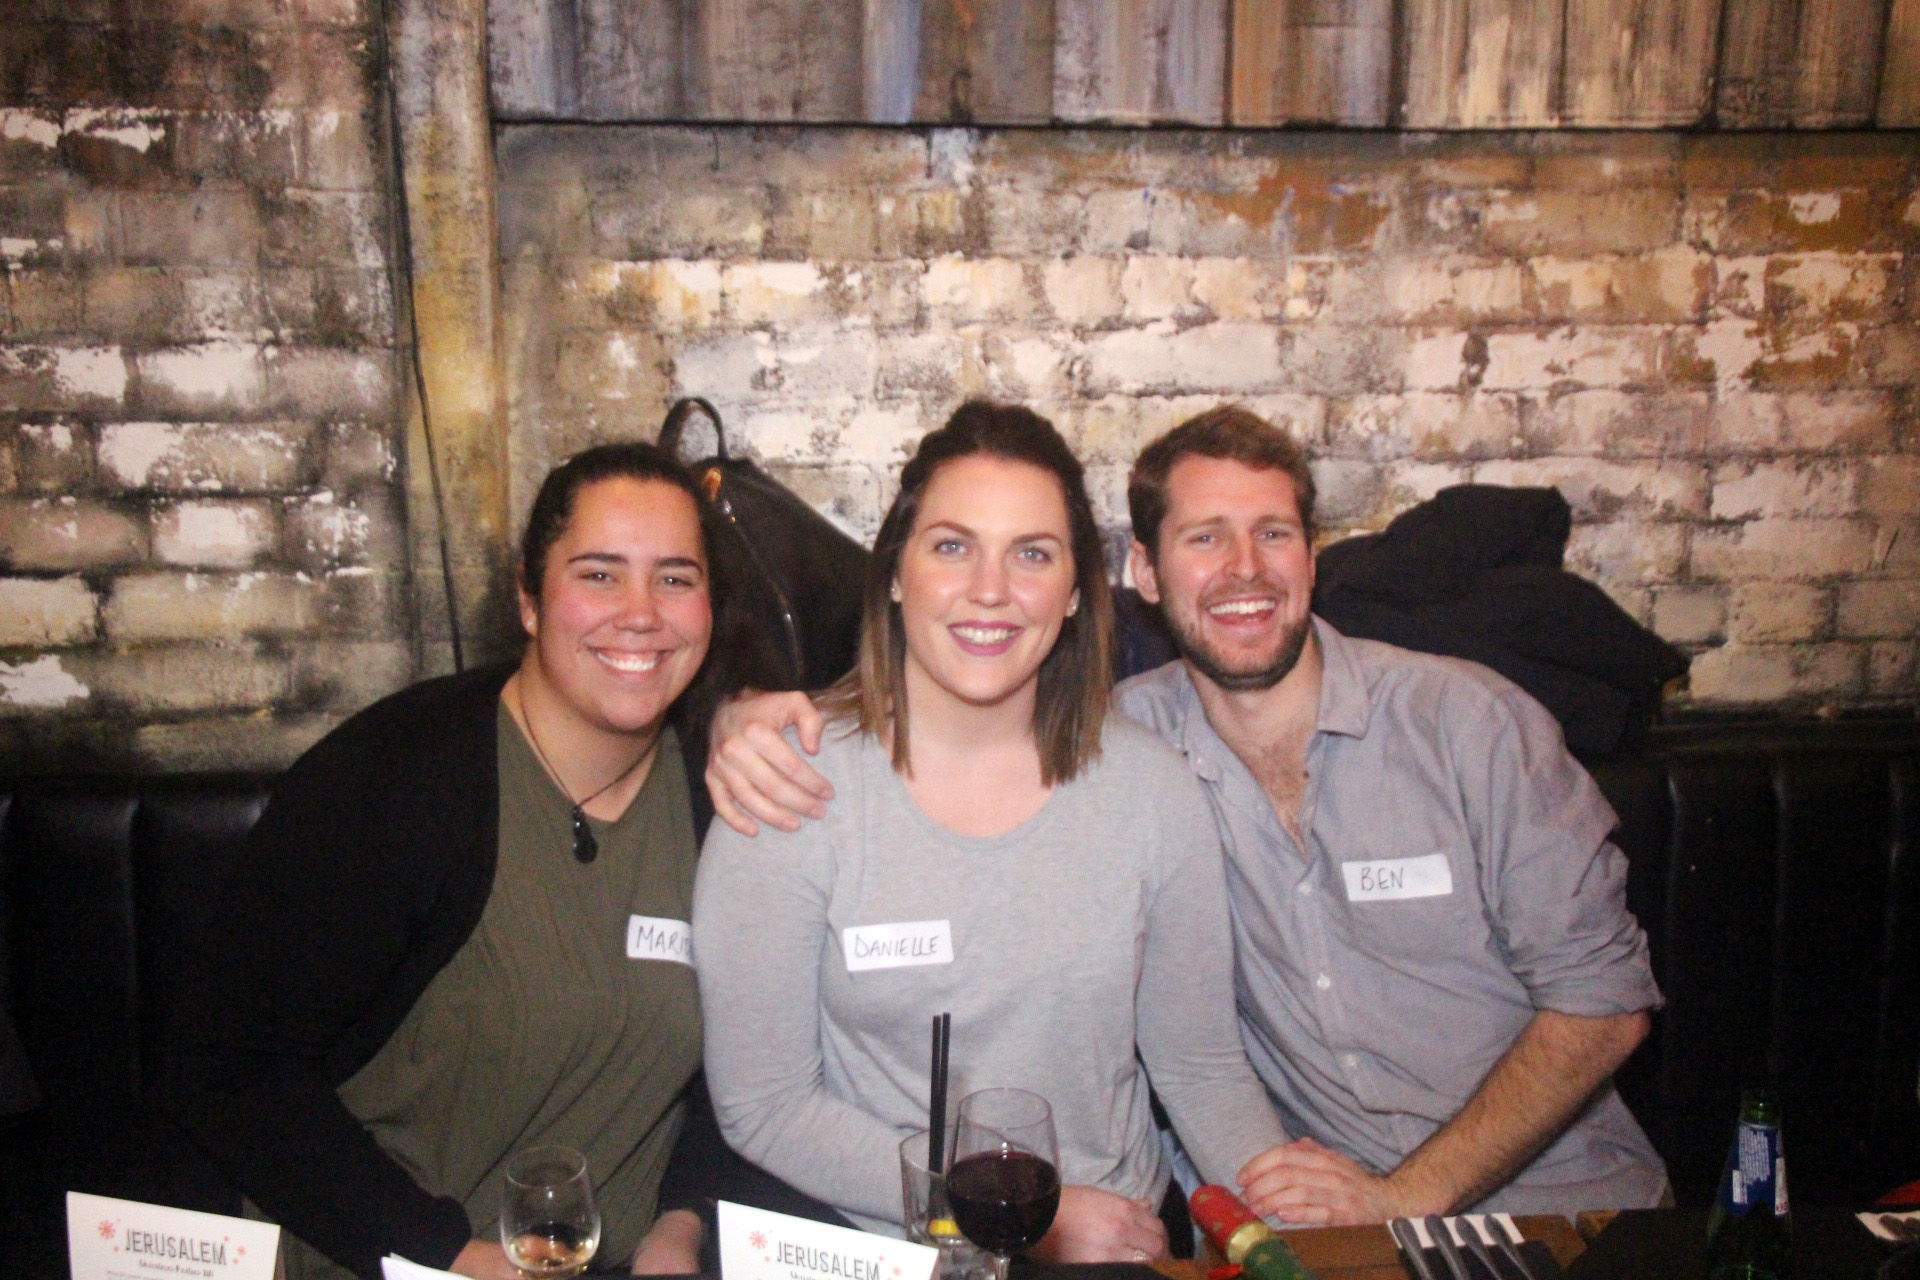 Australians and New Zealanders at a Teaching Personnel drinks event